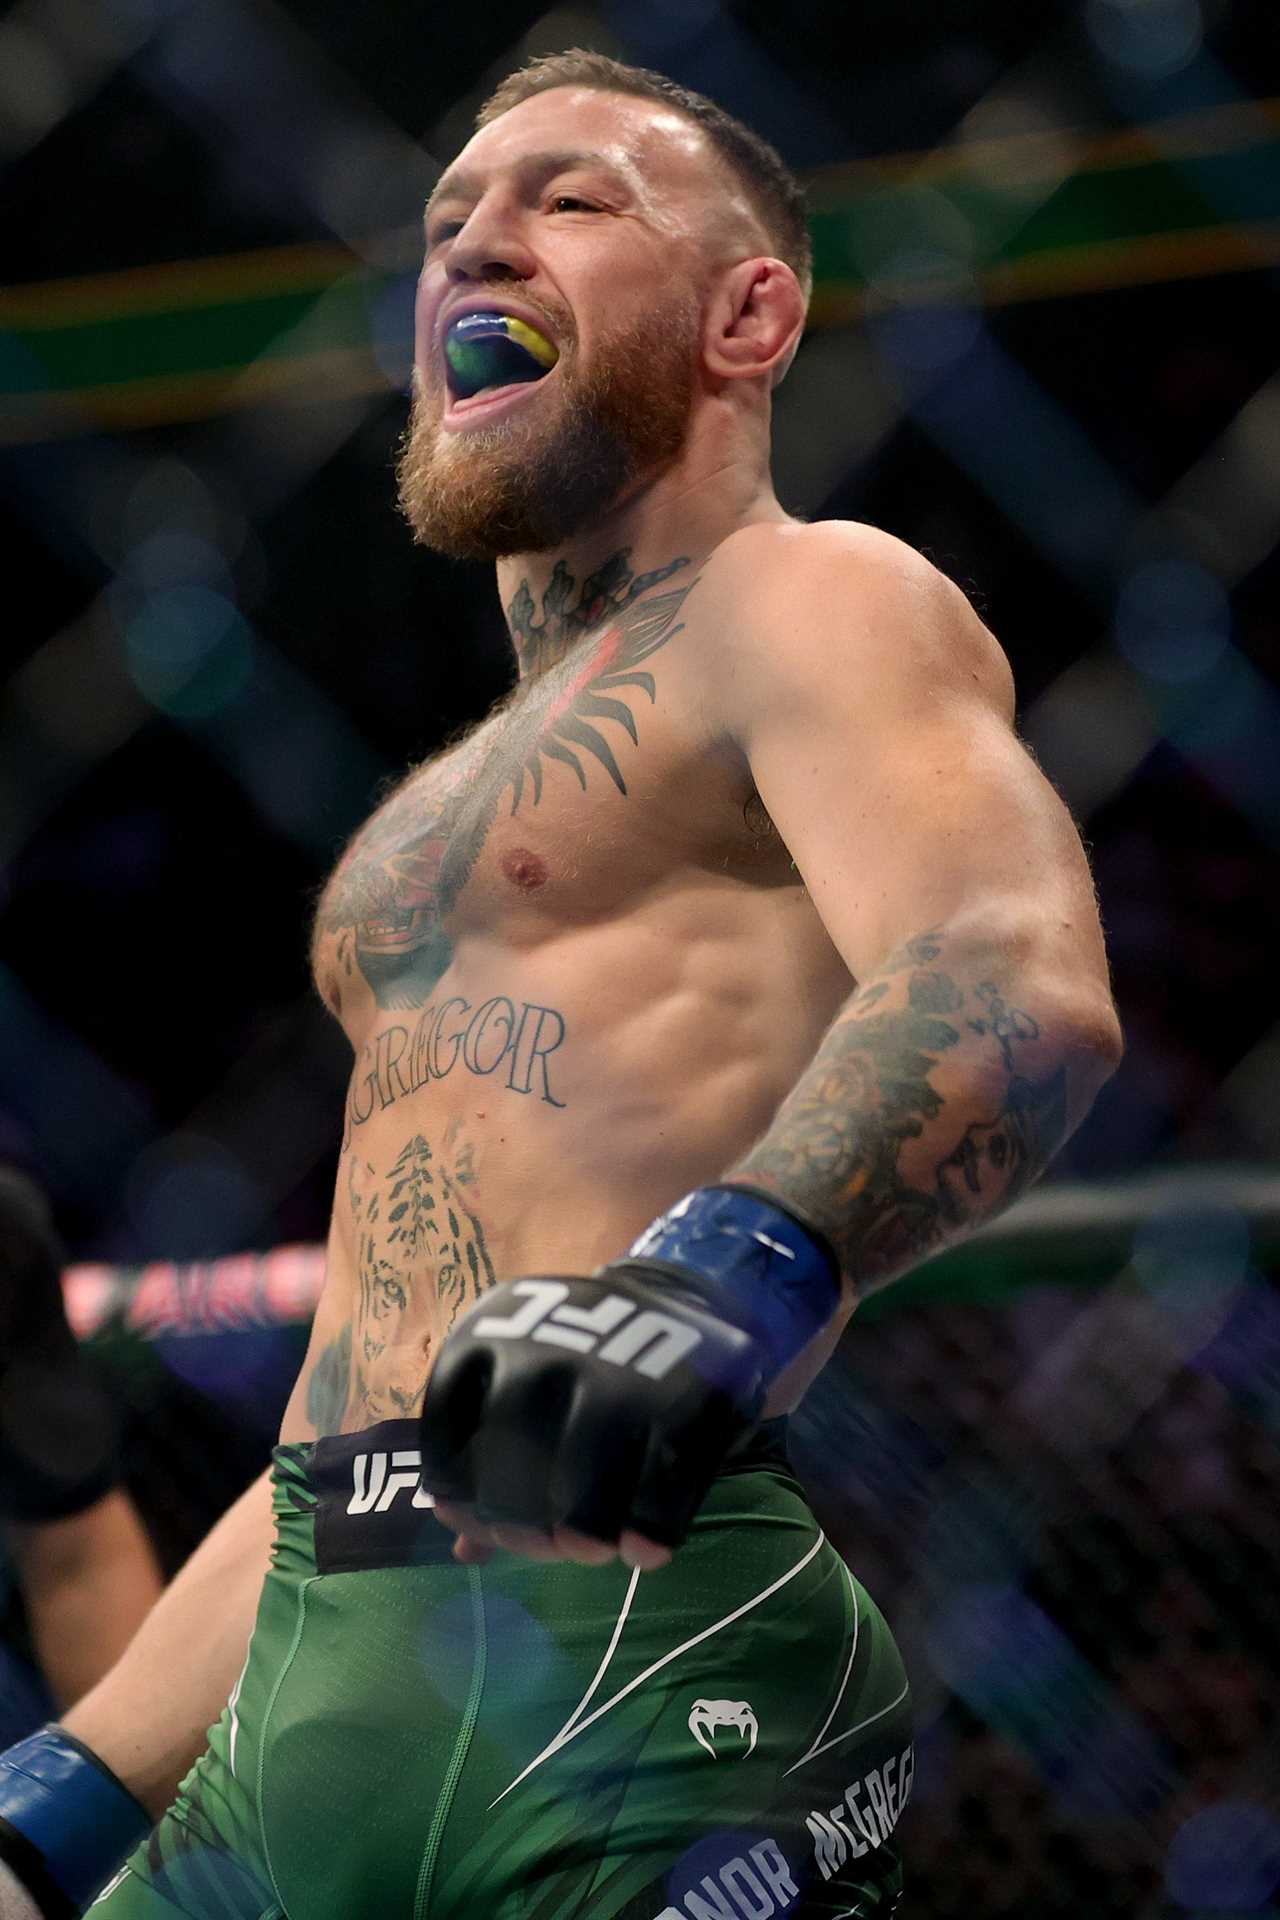 Charles Oliveira, an ex-UFC champ, says Conor McGregor was 'in shock' after he 'thought a lot' about accepting his call-out